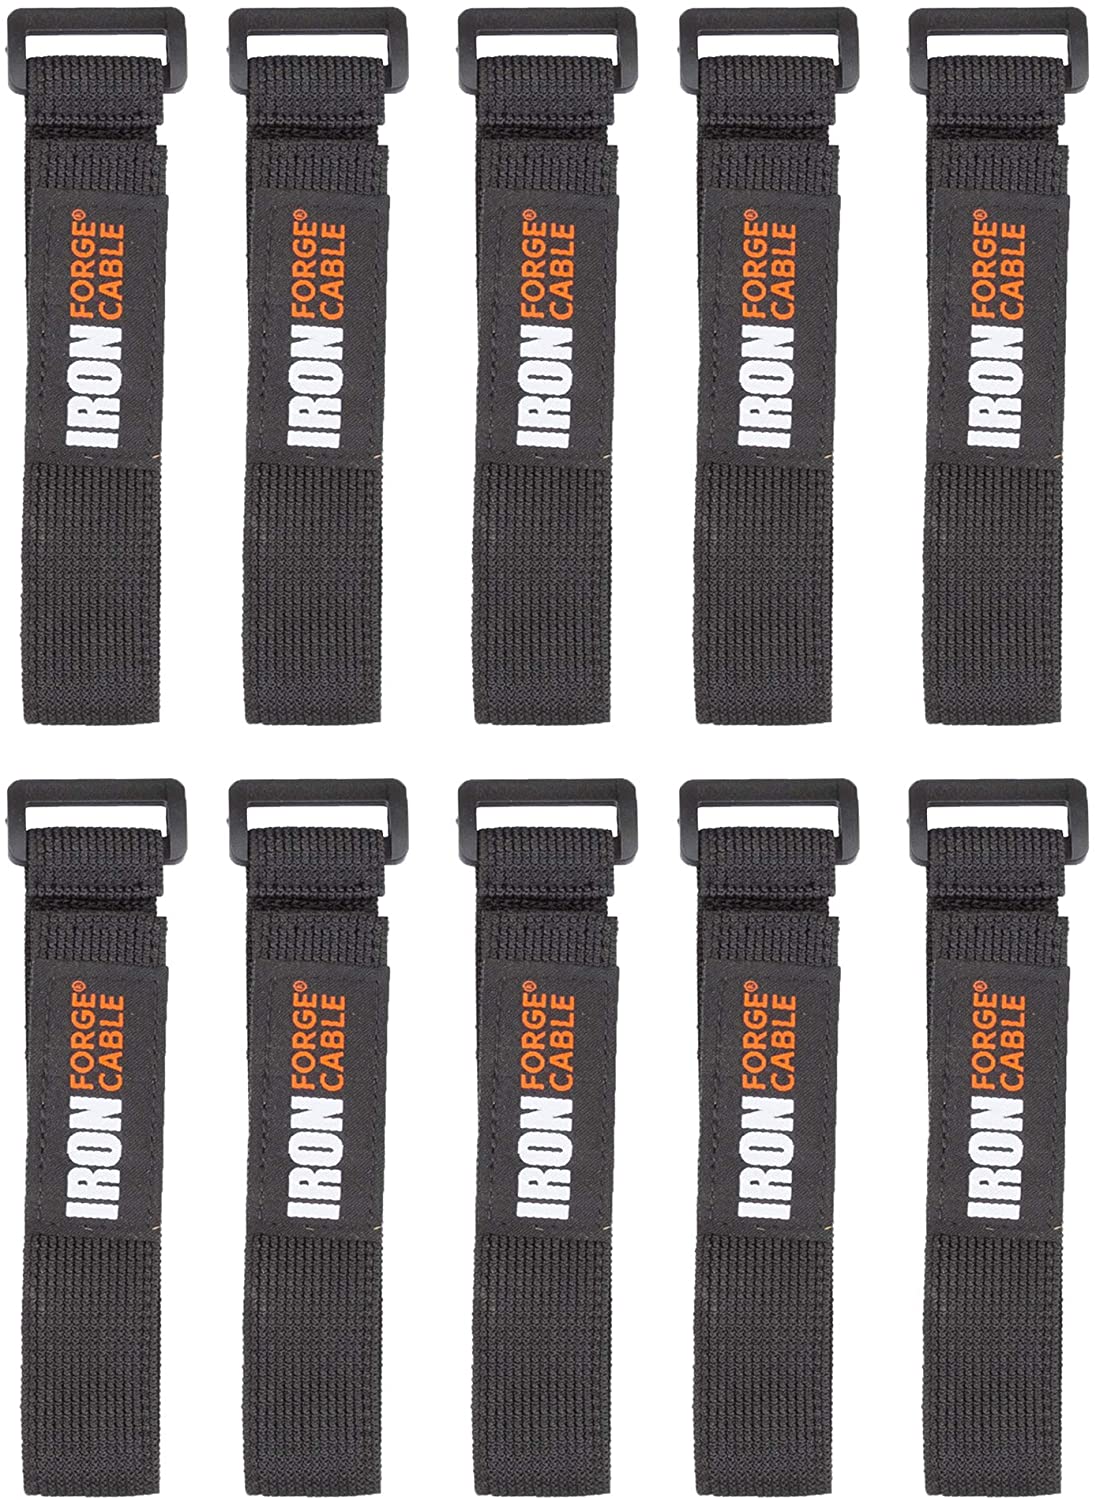 1 x 14 Black Cinching Strap with Plastic Buckle, Bundle of 10